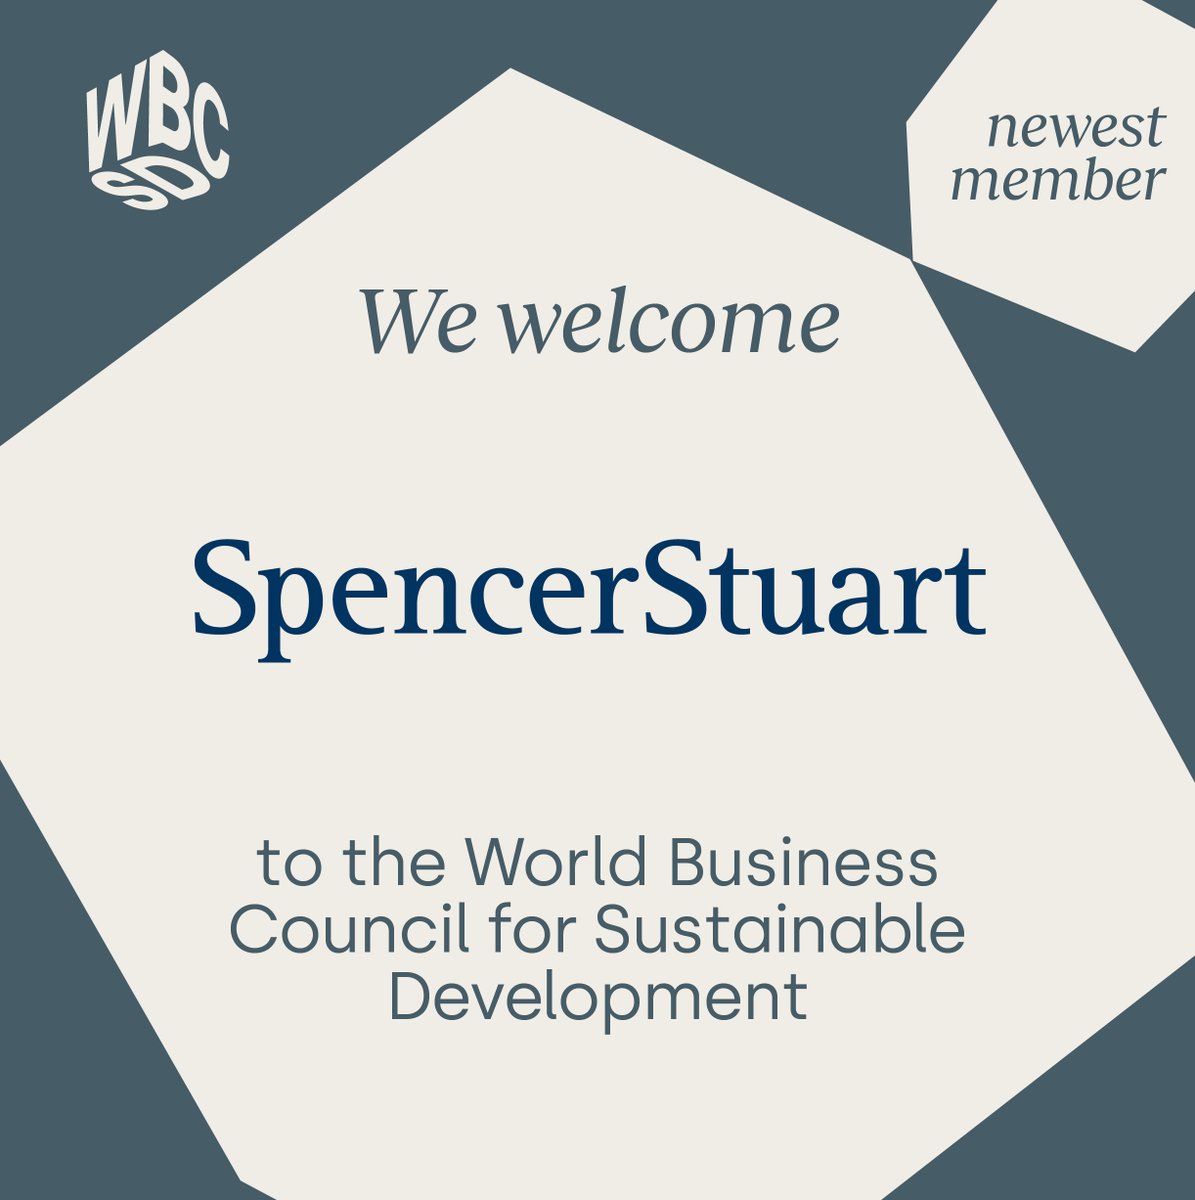 👏 We welcome @SpencerStuart as the newest member of WBCSD! A leading global executive search & #leadership advisory firm, Spencer Stuart will help us empower organizations to make impactful decisions that benefit the planet & society. wbcsd.org/Overview/News-…